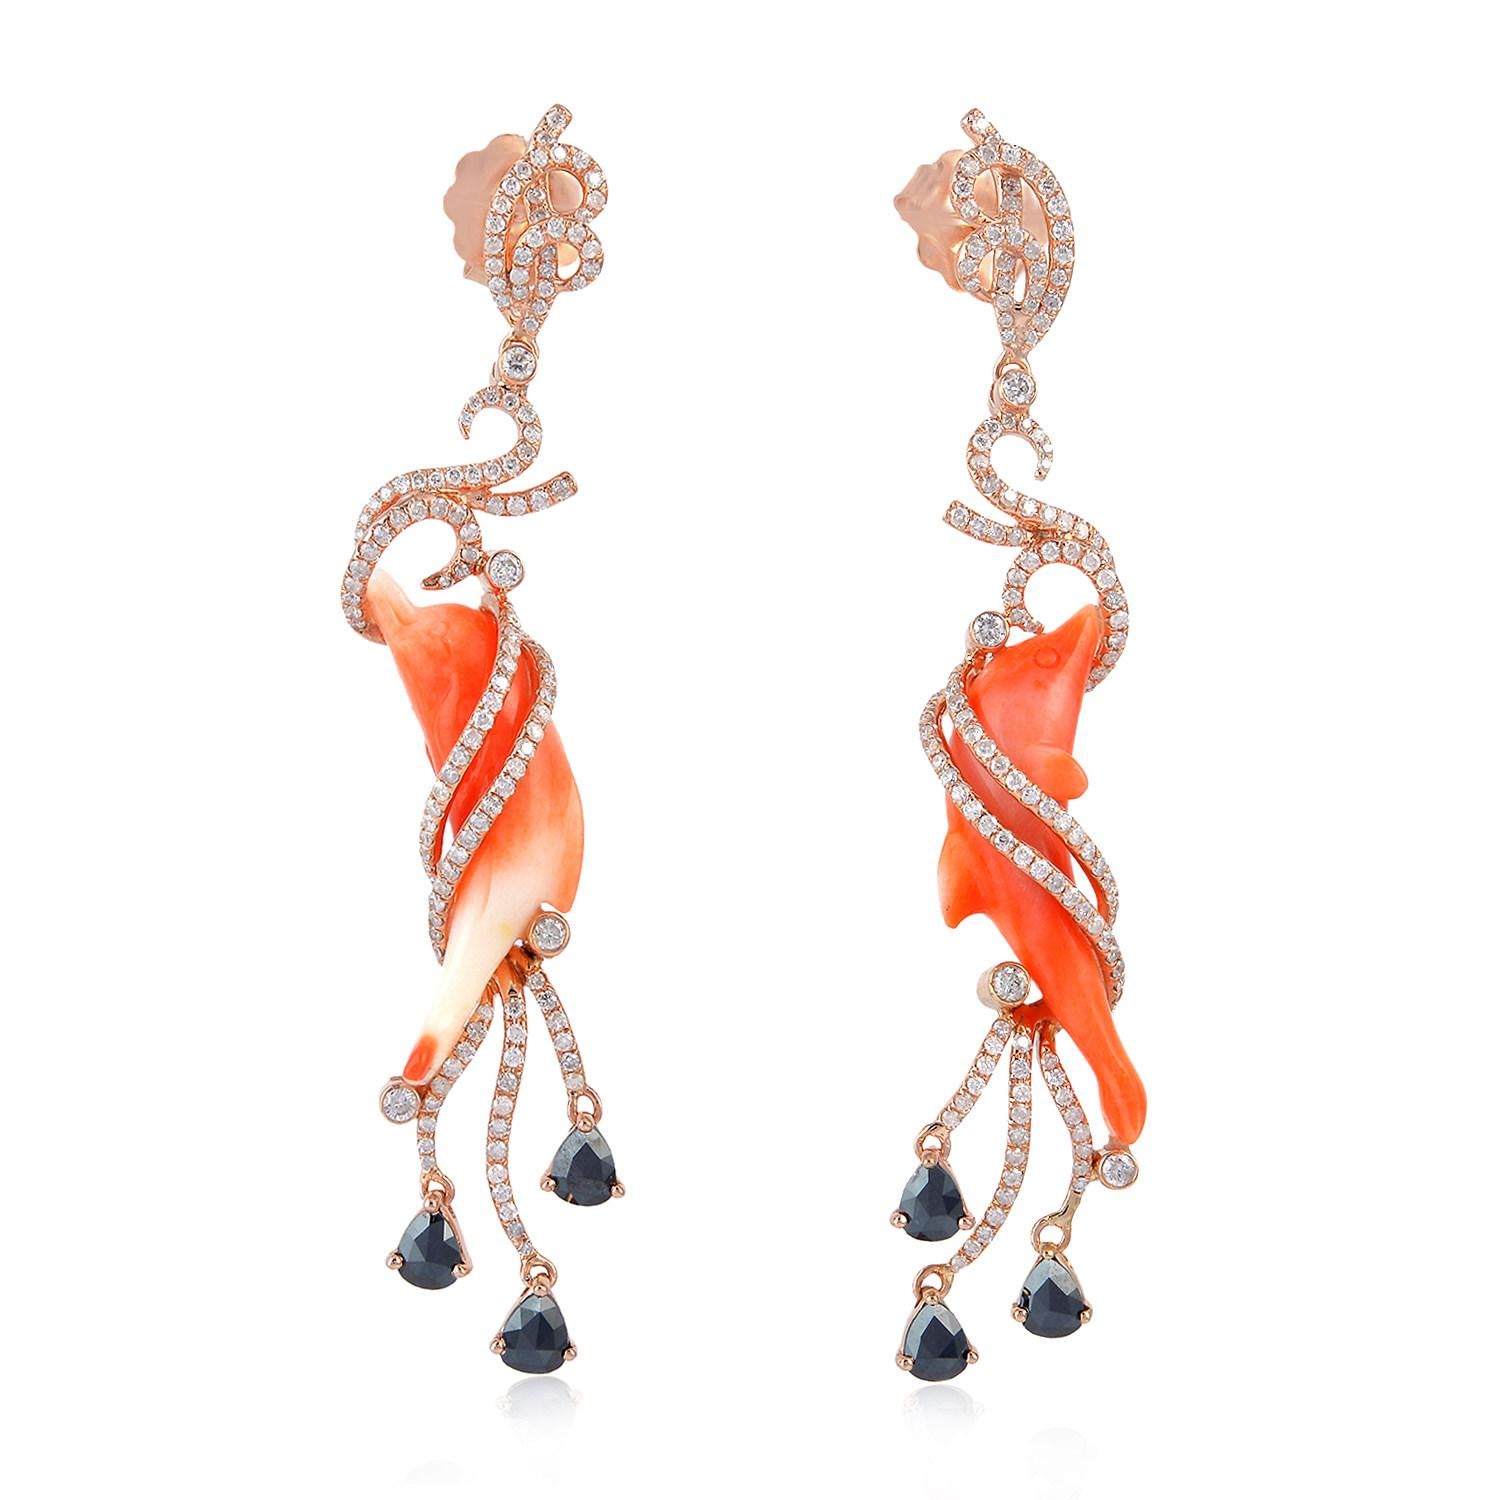 Mixed Cut 21.42 Carat Carved Coral Dolphin Diamond Earrings For Sale